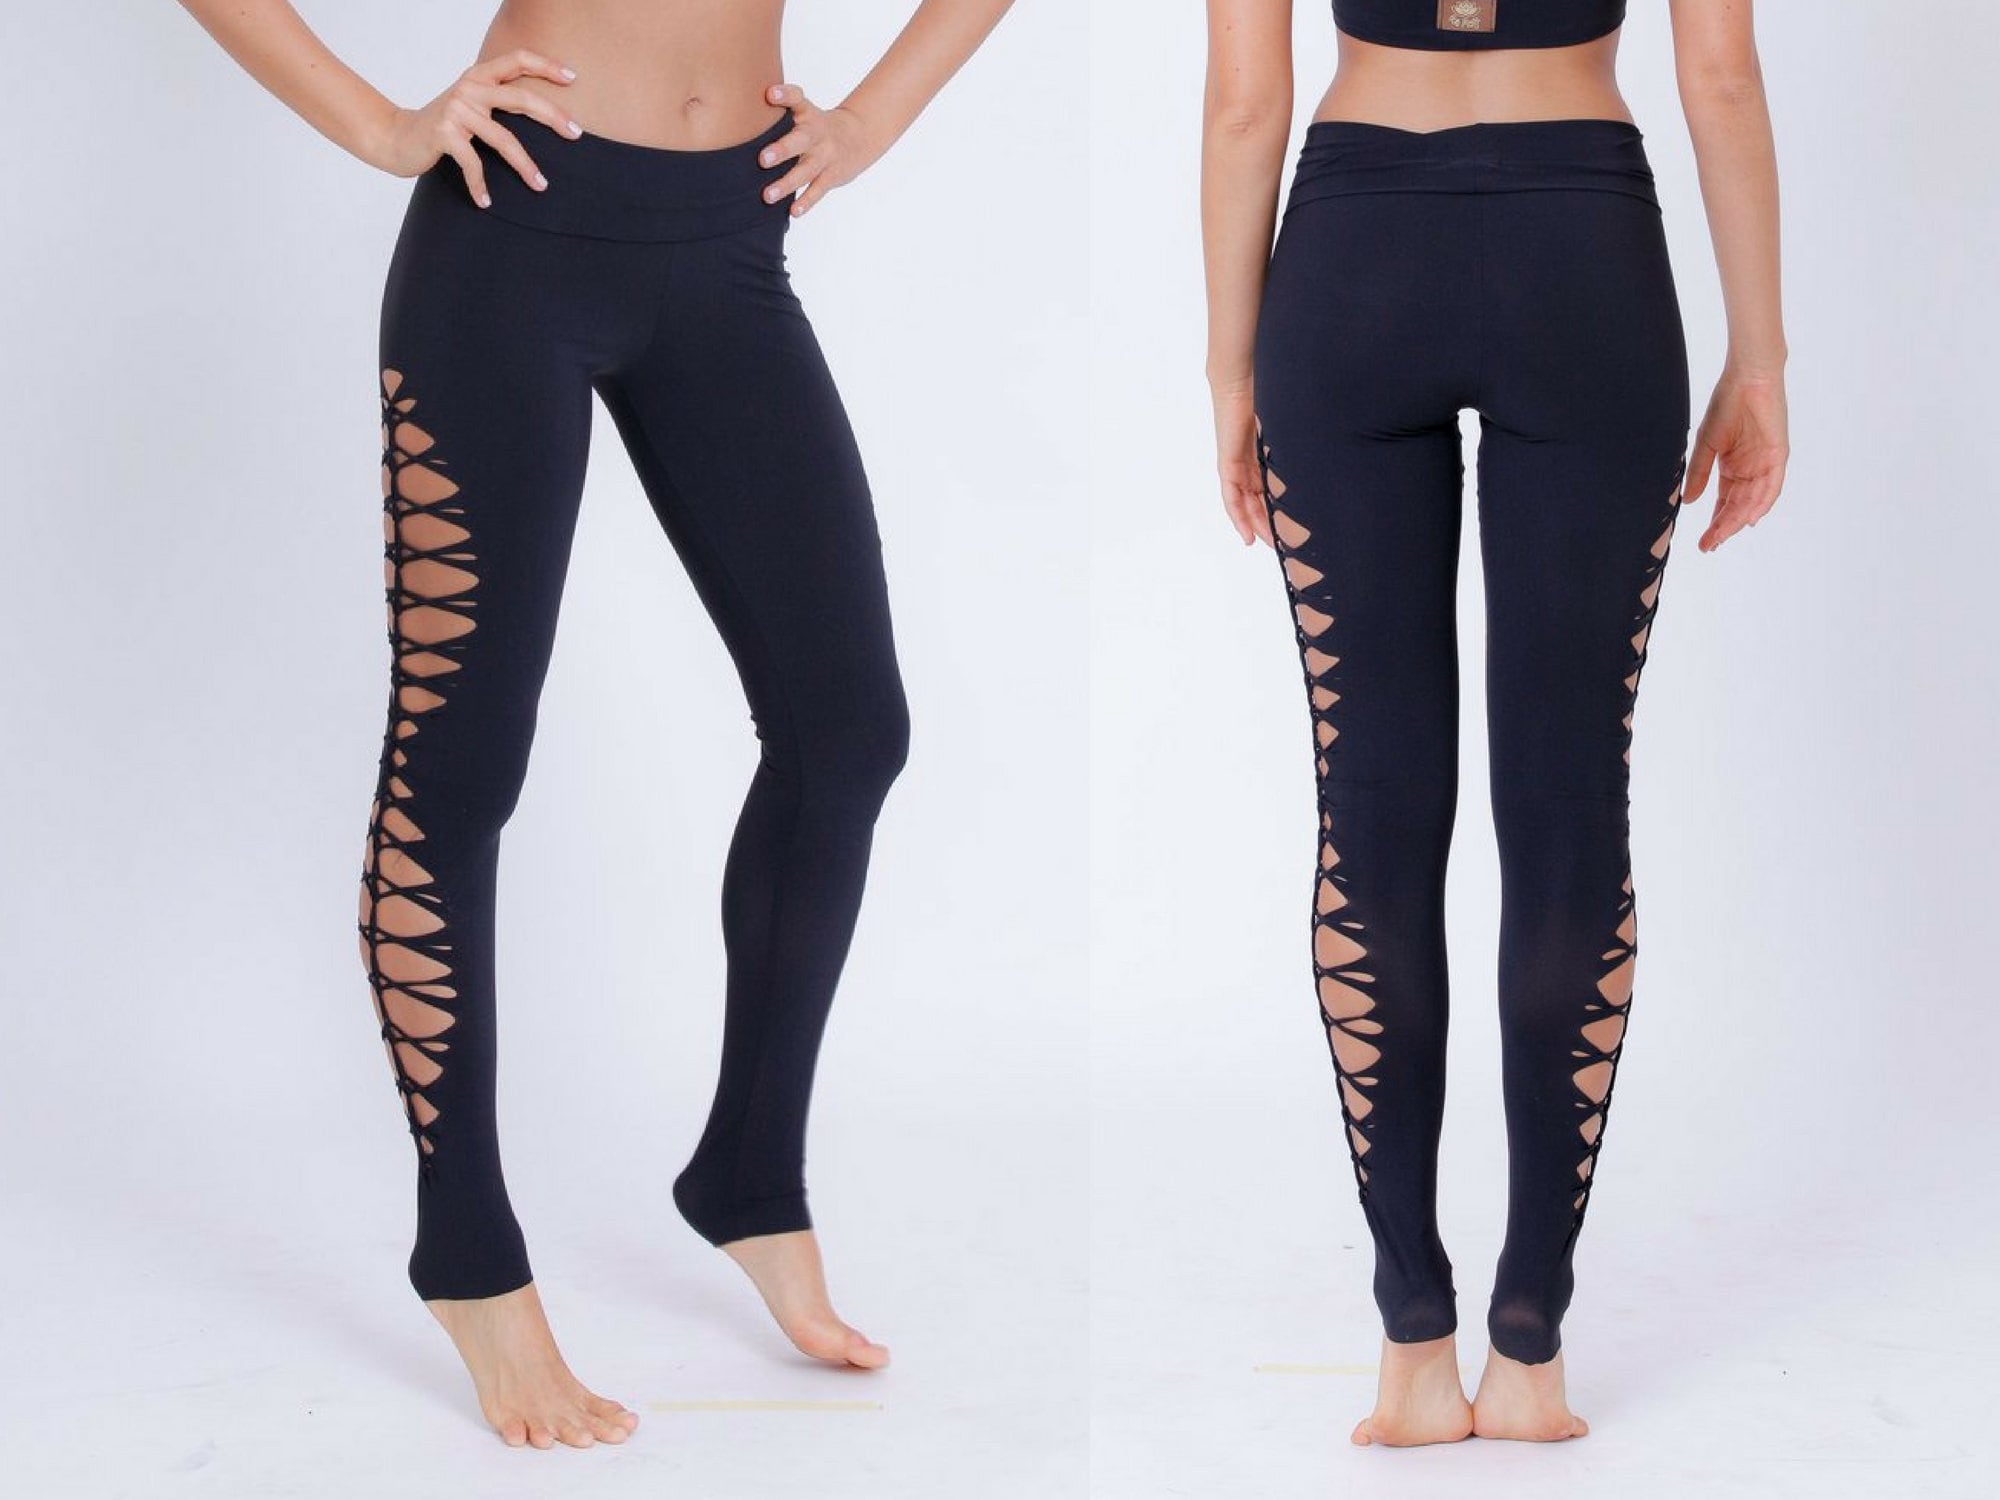 POCKETS! Sculpting Legging + Cargo = Everything 😍 - Alo Yoga Email Archive